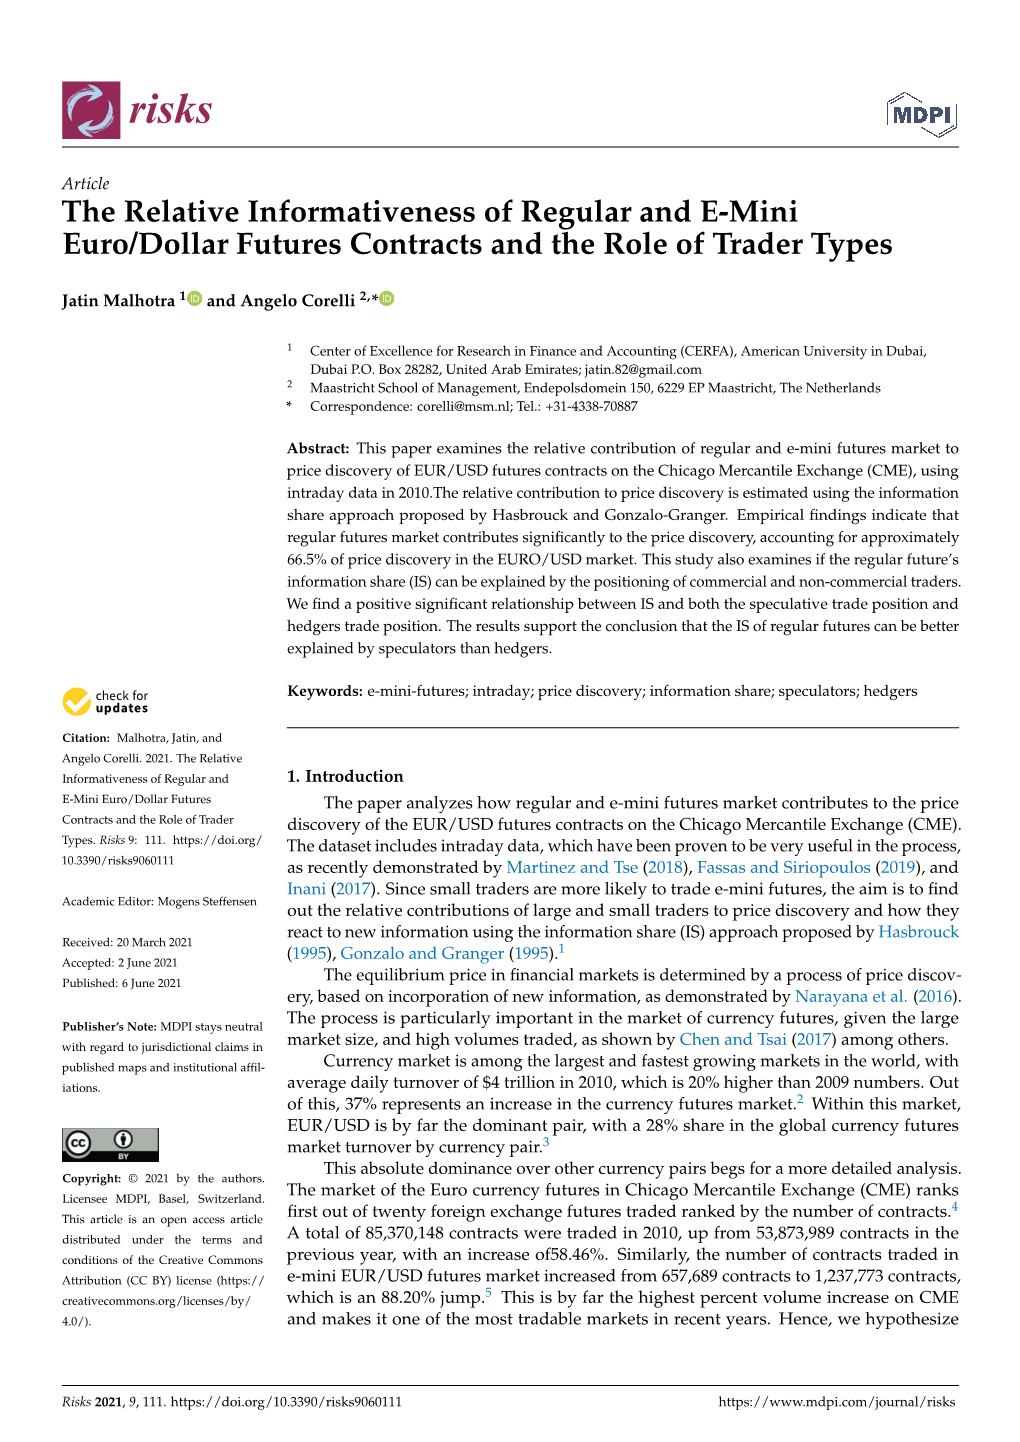 The Relative Informativeness of Regular and E-Mini Euro/Dollar Futures Contracts and the Role of Trader Types